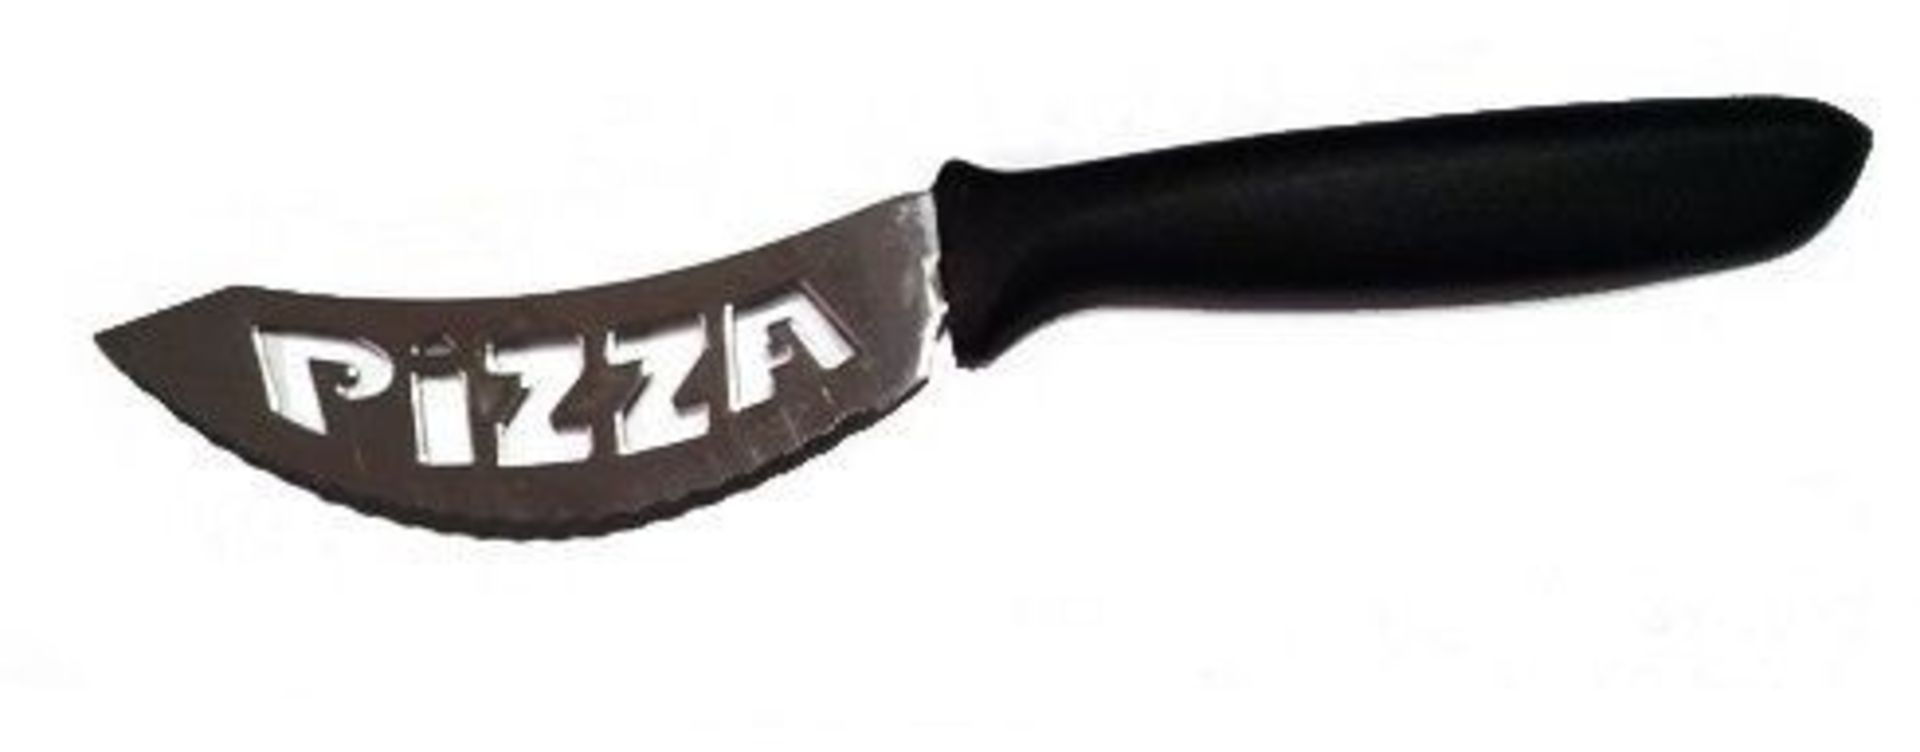 2 AS NEW PACKAGED BETTER WARE PIZZA KNIVES (VIEWING HIGHLY RECOMMENDED)